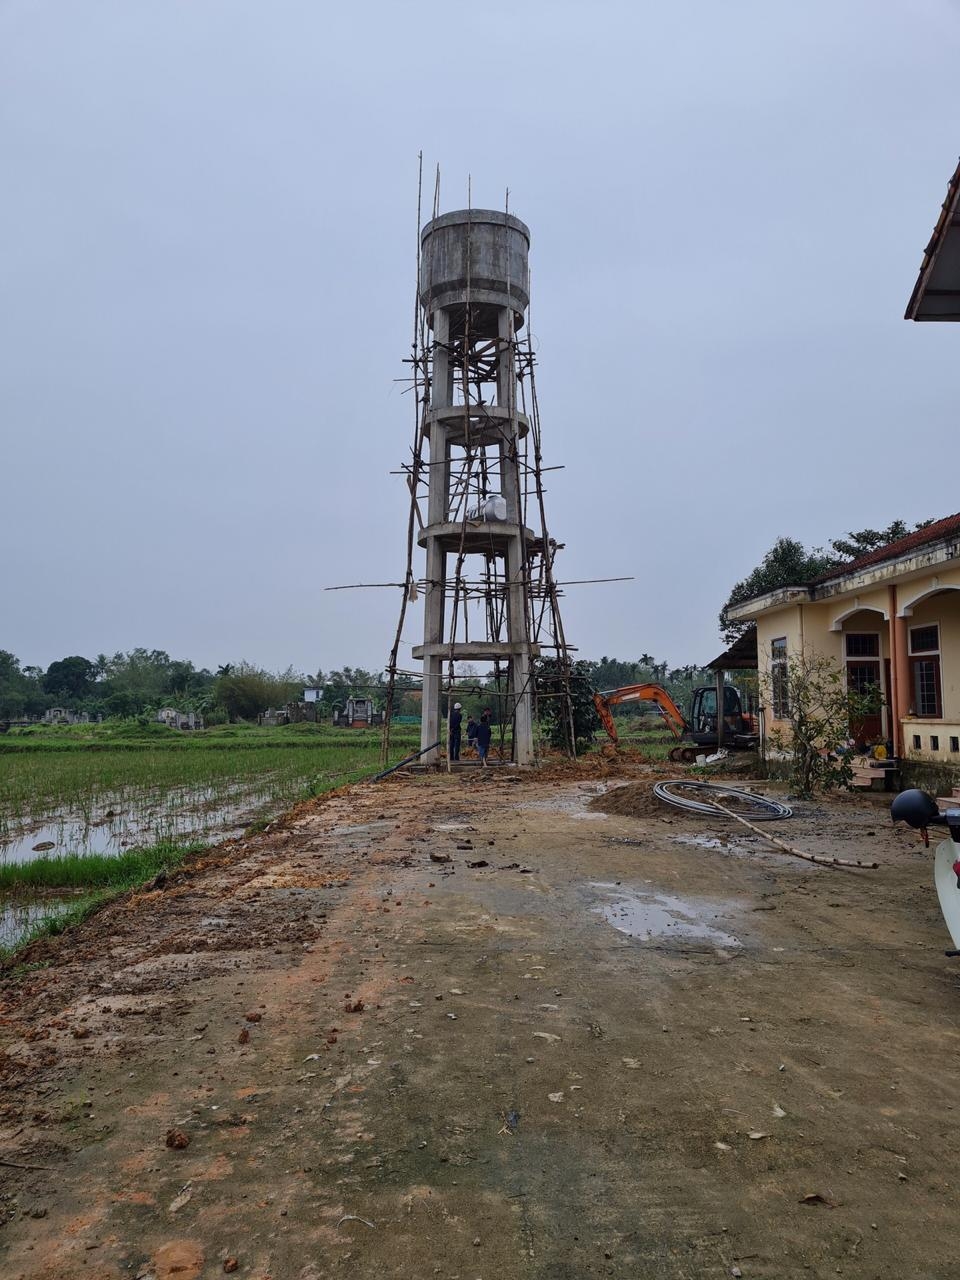 Czech funded water project benefits local people in quang tri's village